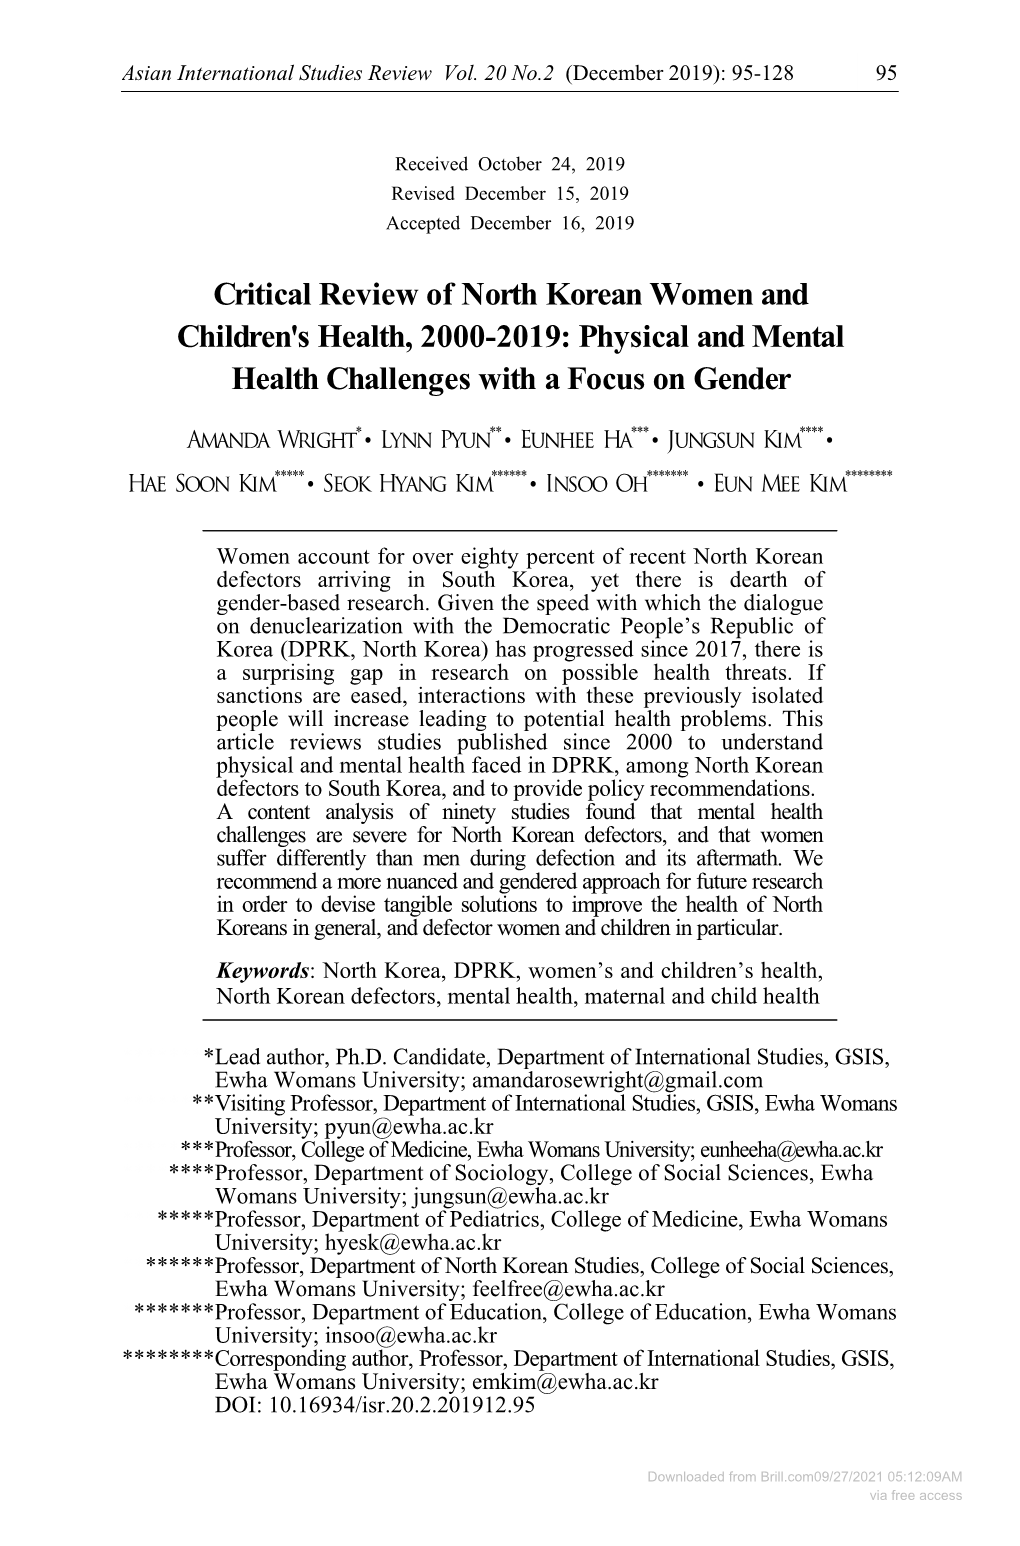 05.Critical Review of North Korean Women and Children's Health